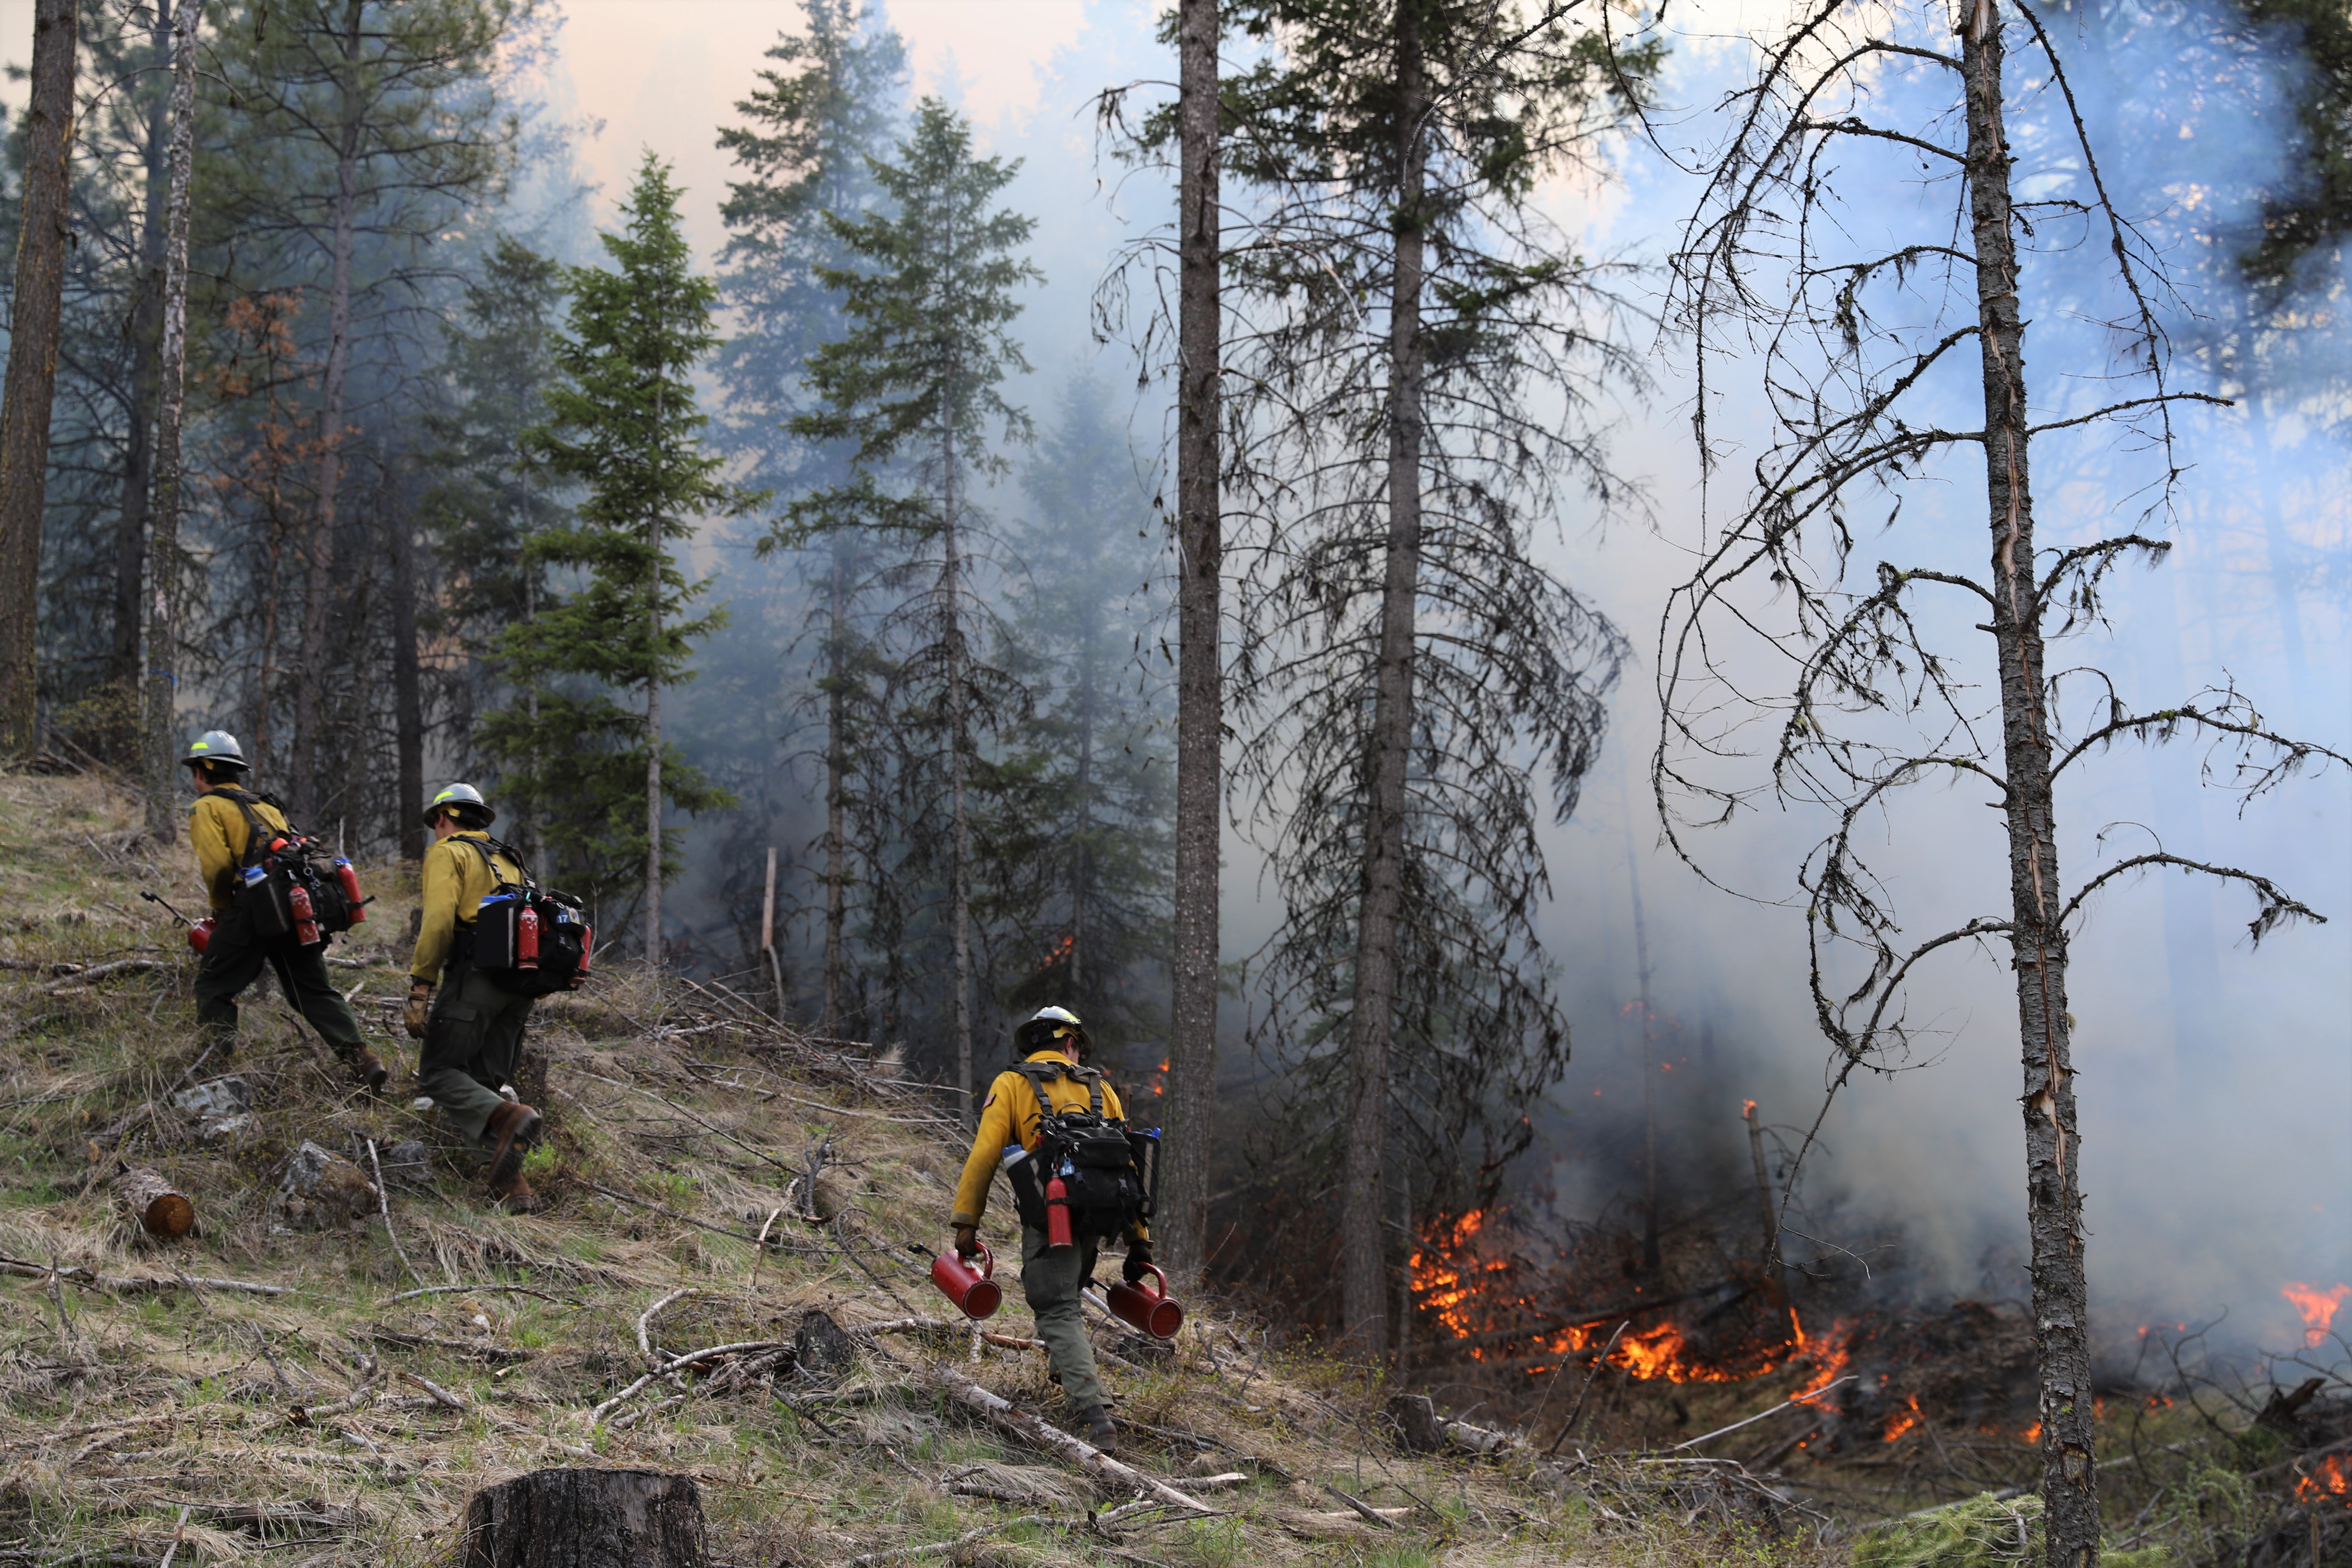 Firefighters climb a hill while torching the underbrush